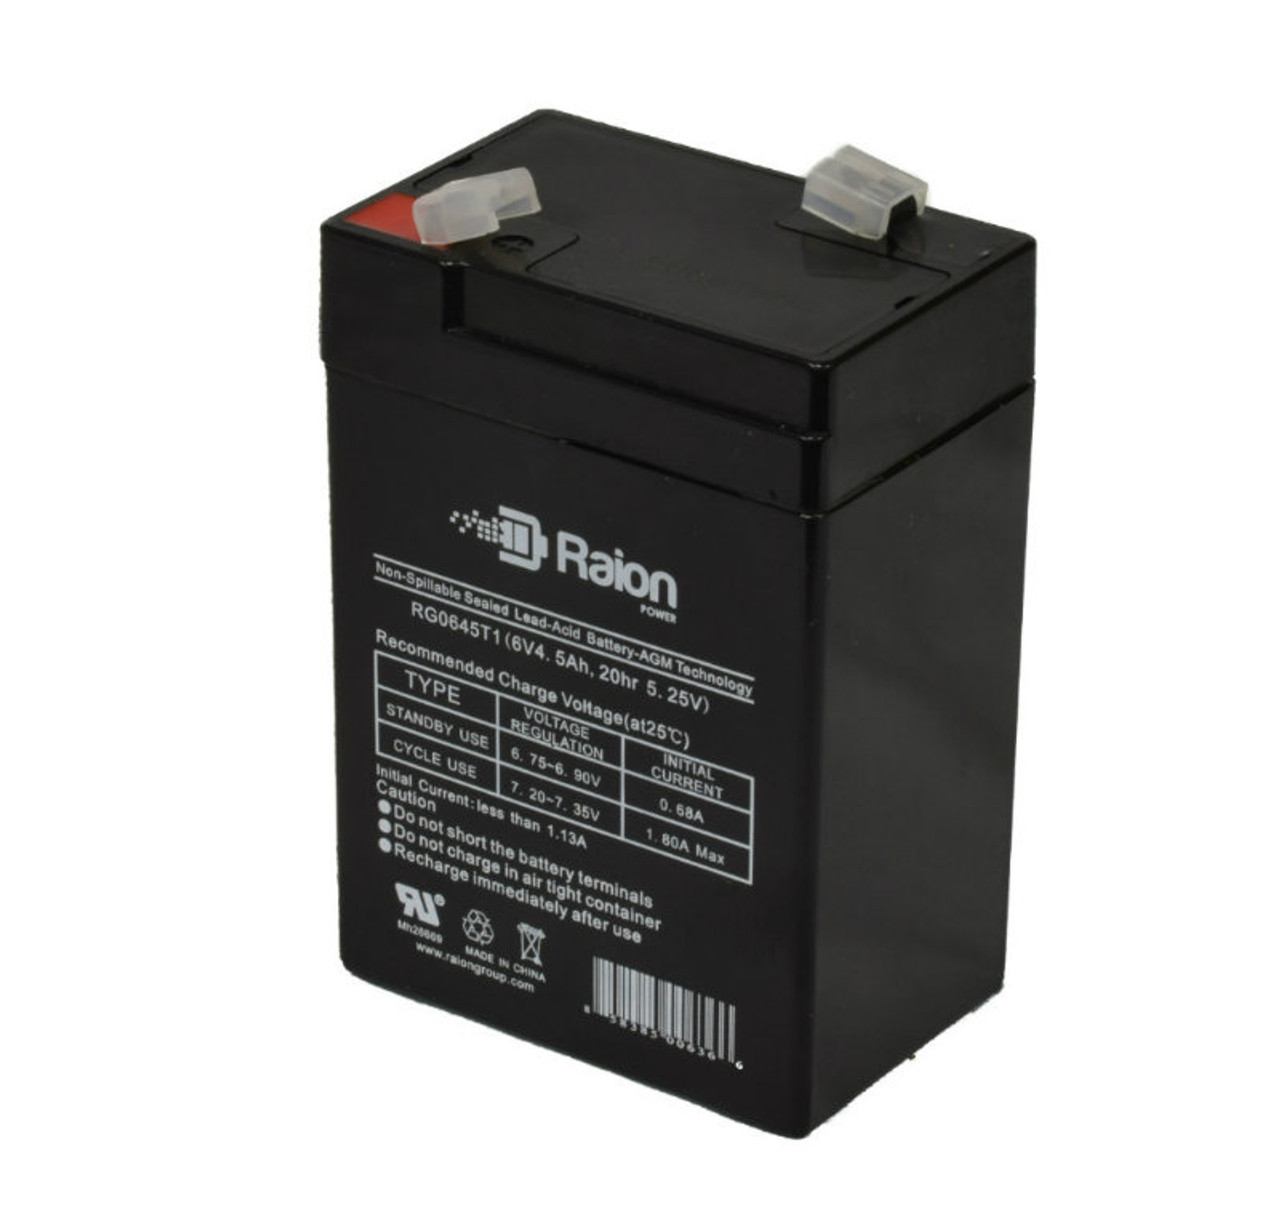 Raion Power RG0645T1 6V 4.5Ah Replacement Battery Cartridge for Sho-Me 90985